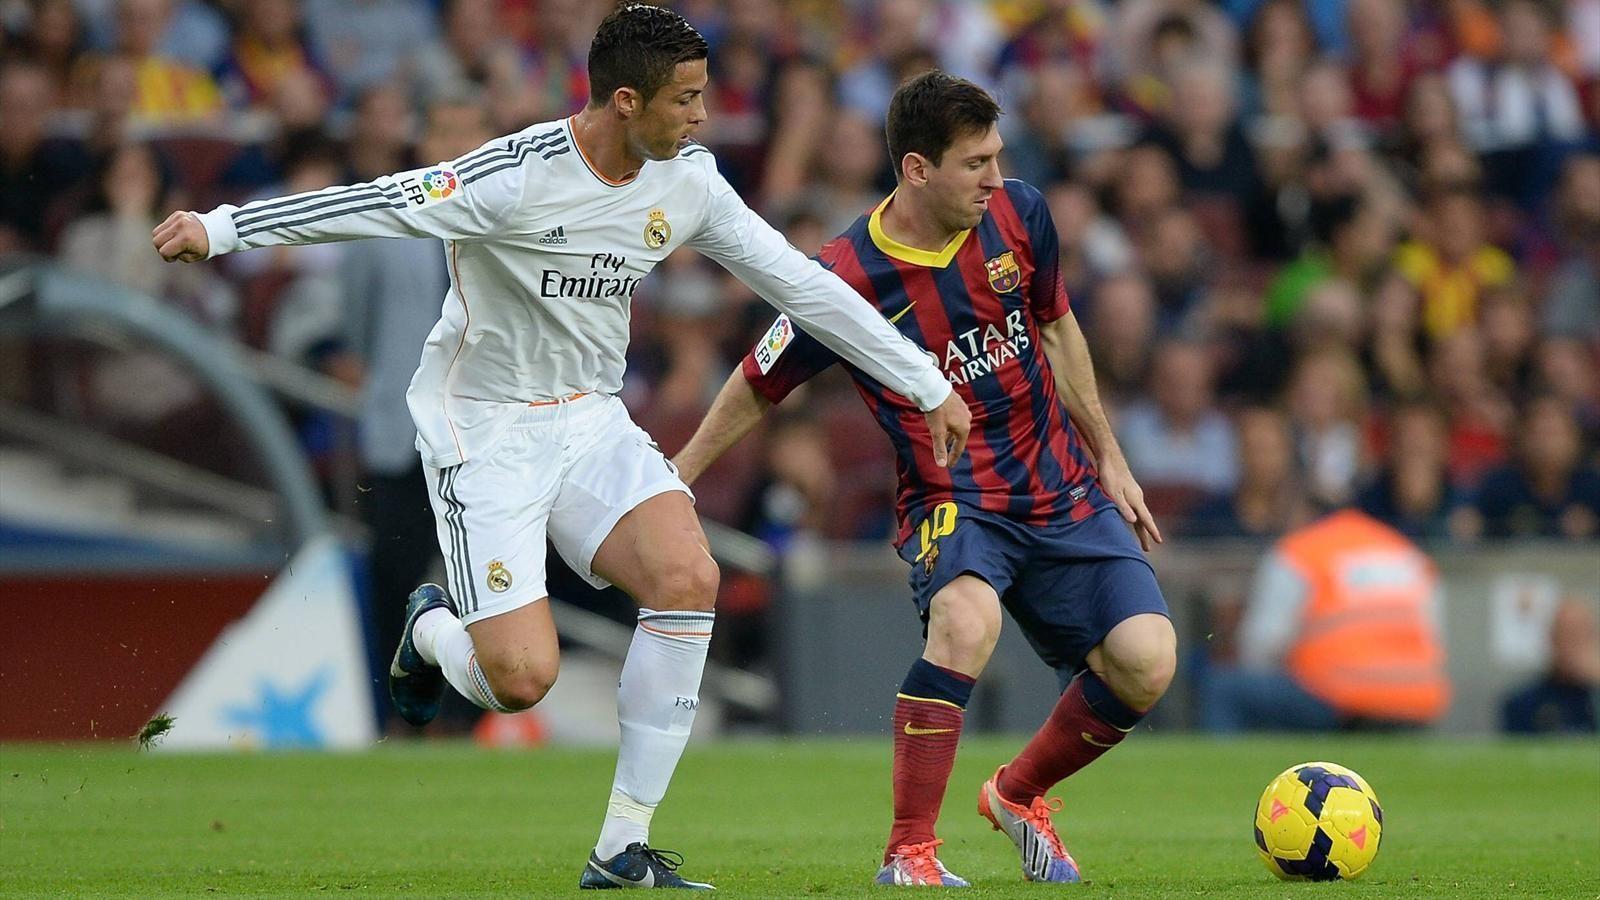 Messi vs Ronaldo: What Others Say